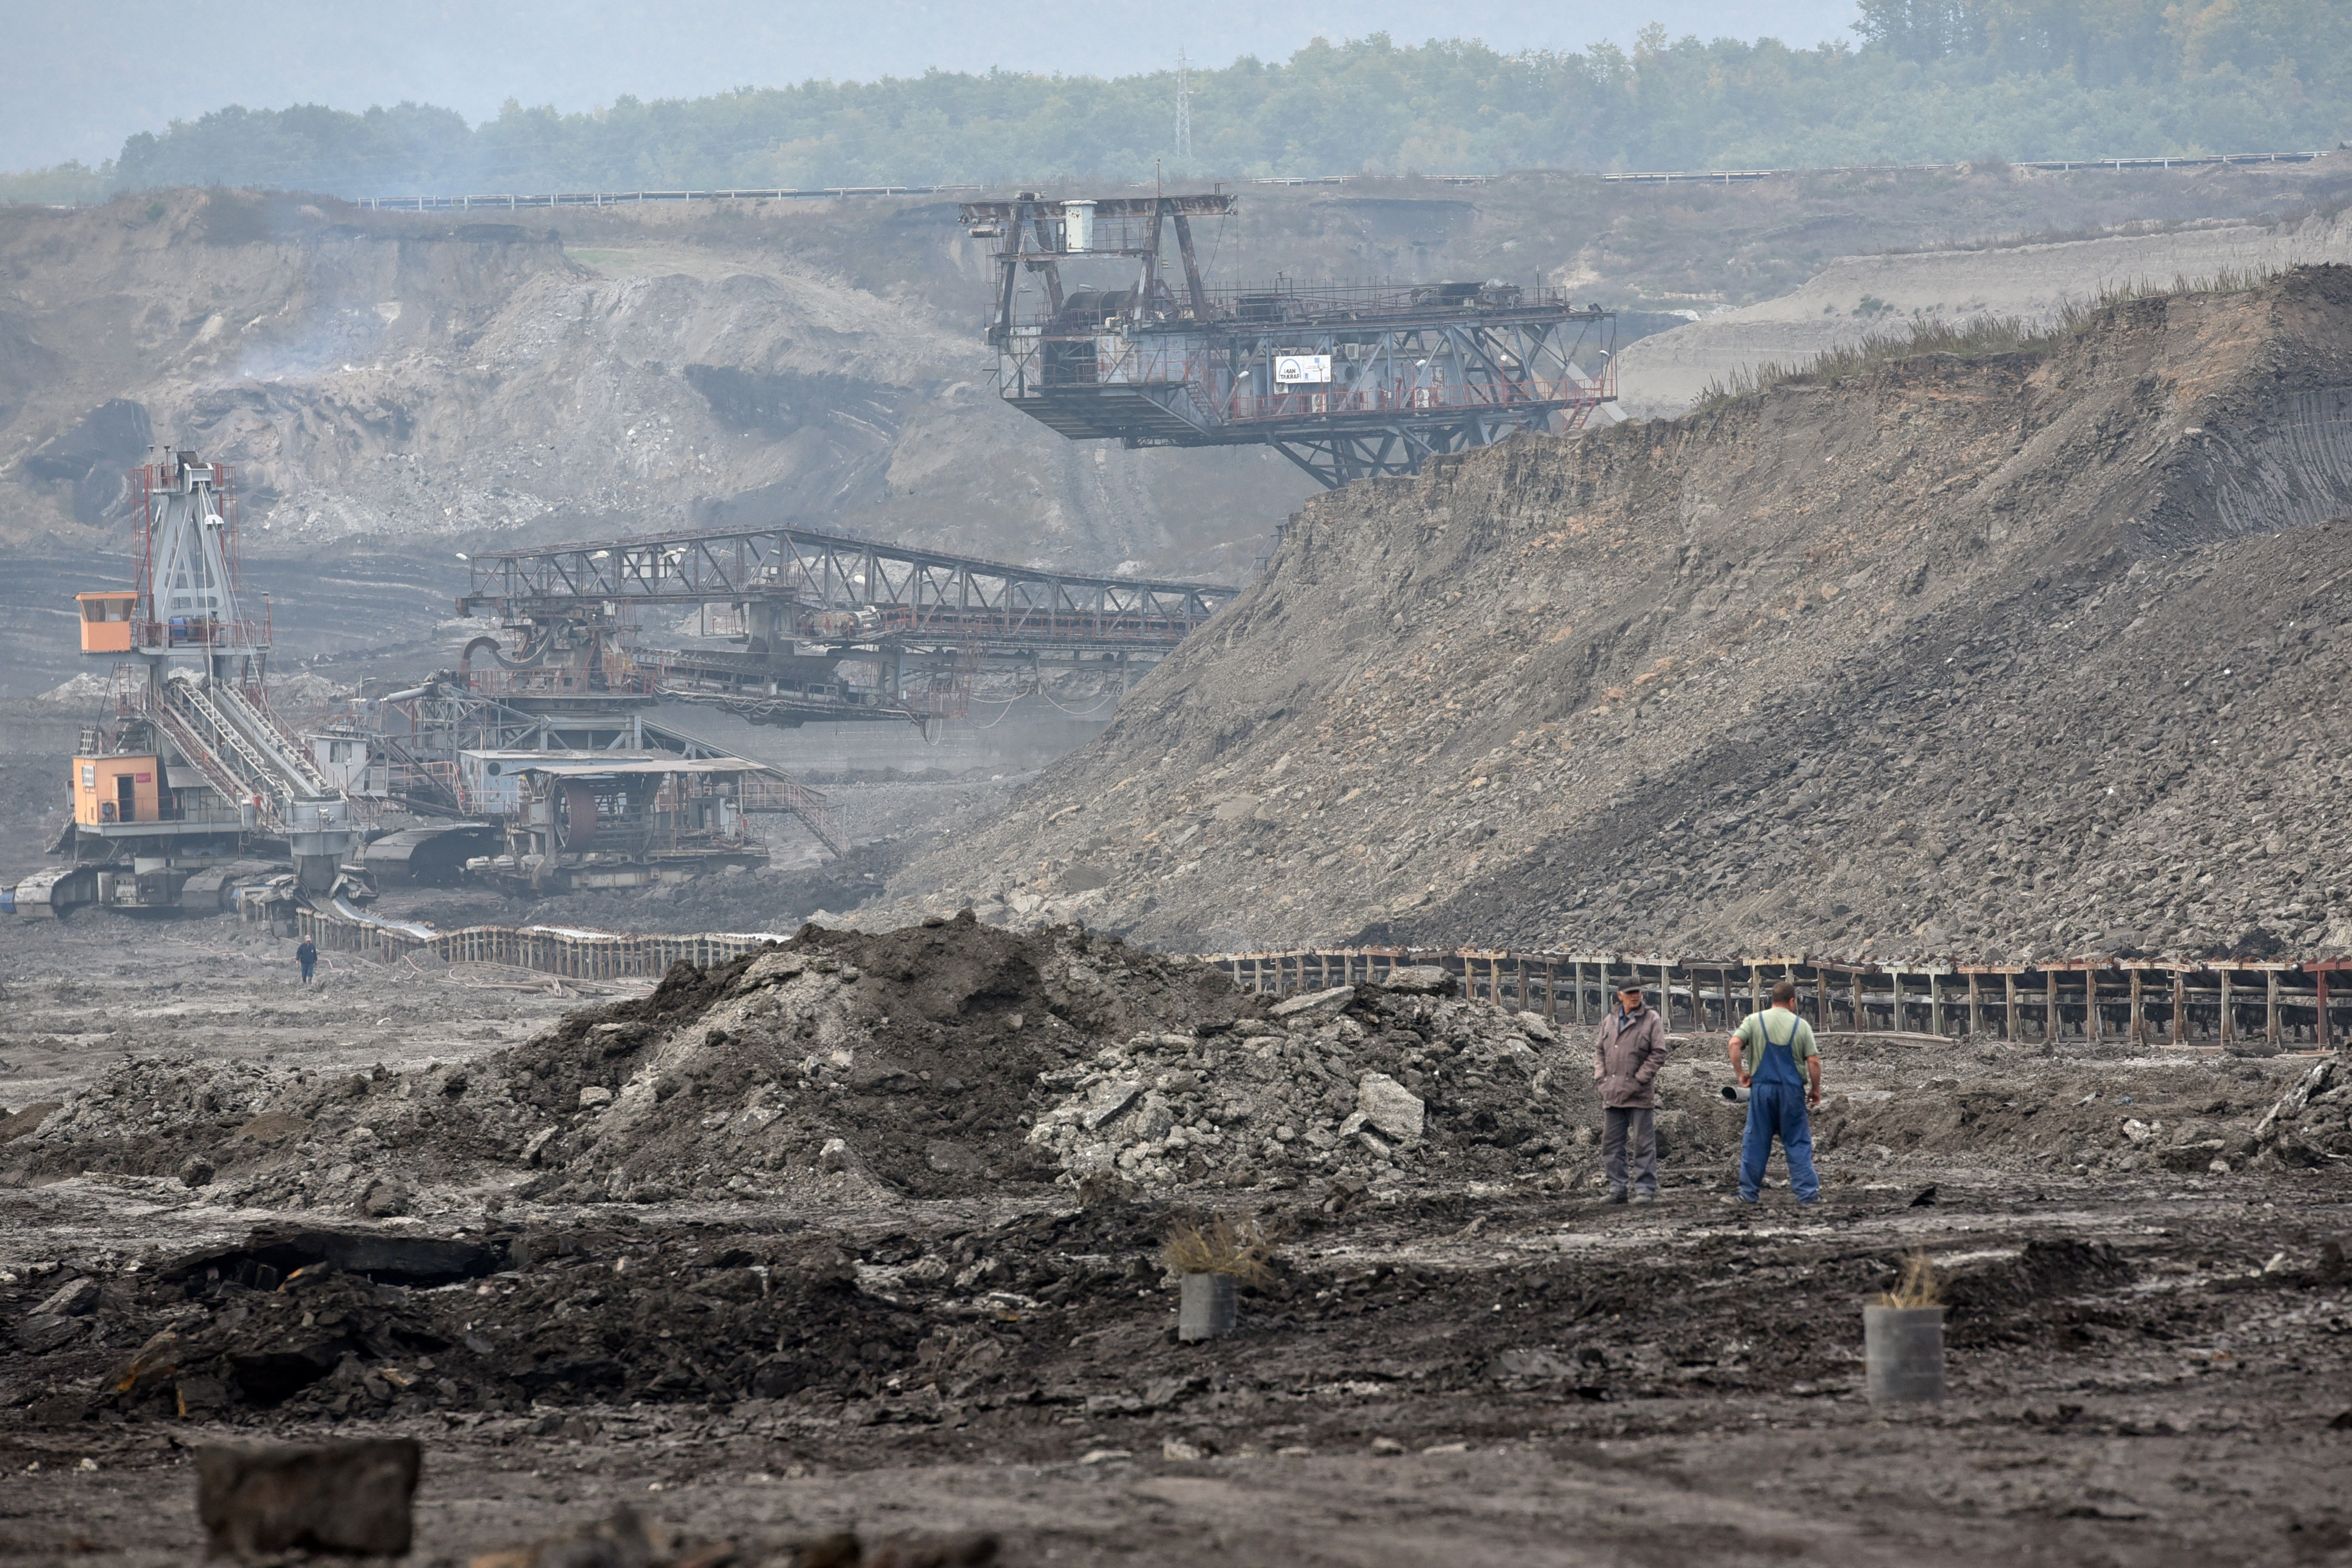 Workers stand in a lignite mine, near the town of Obiliq